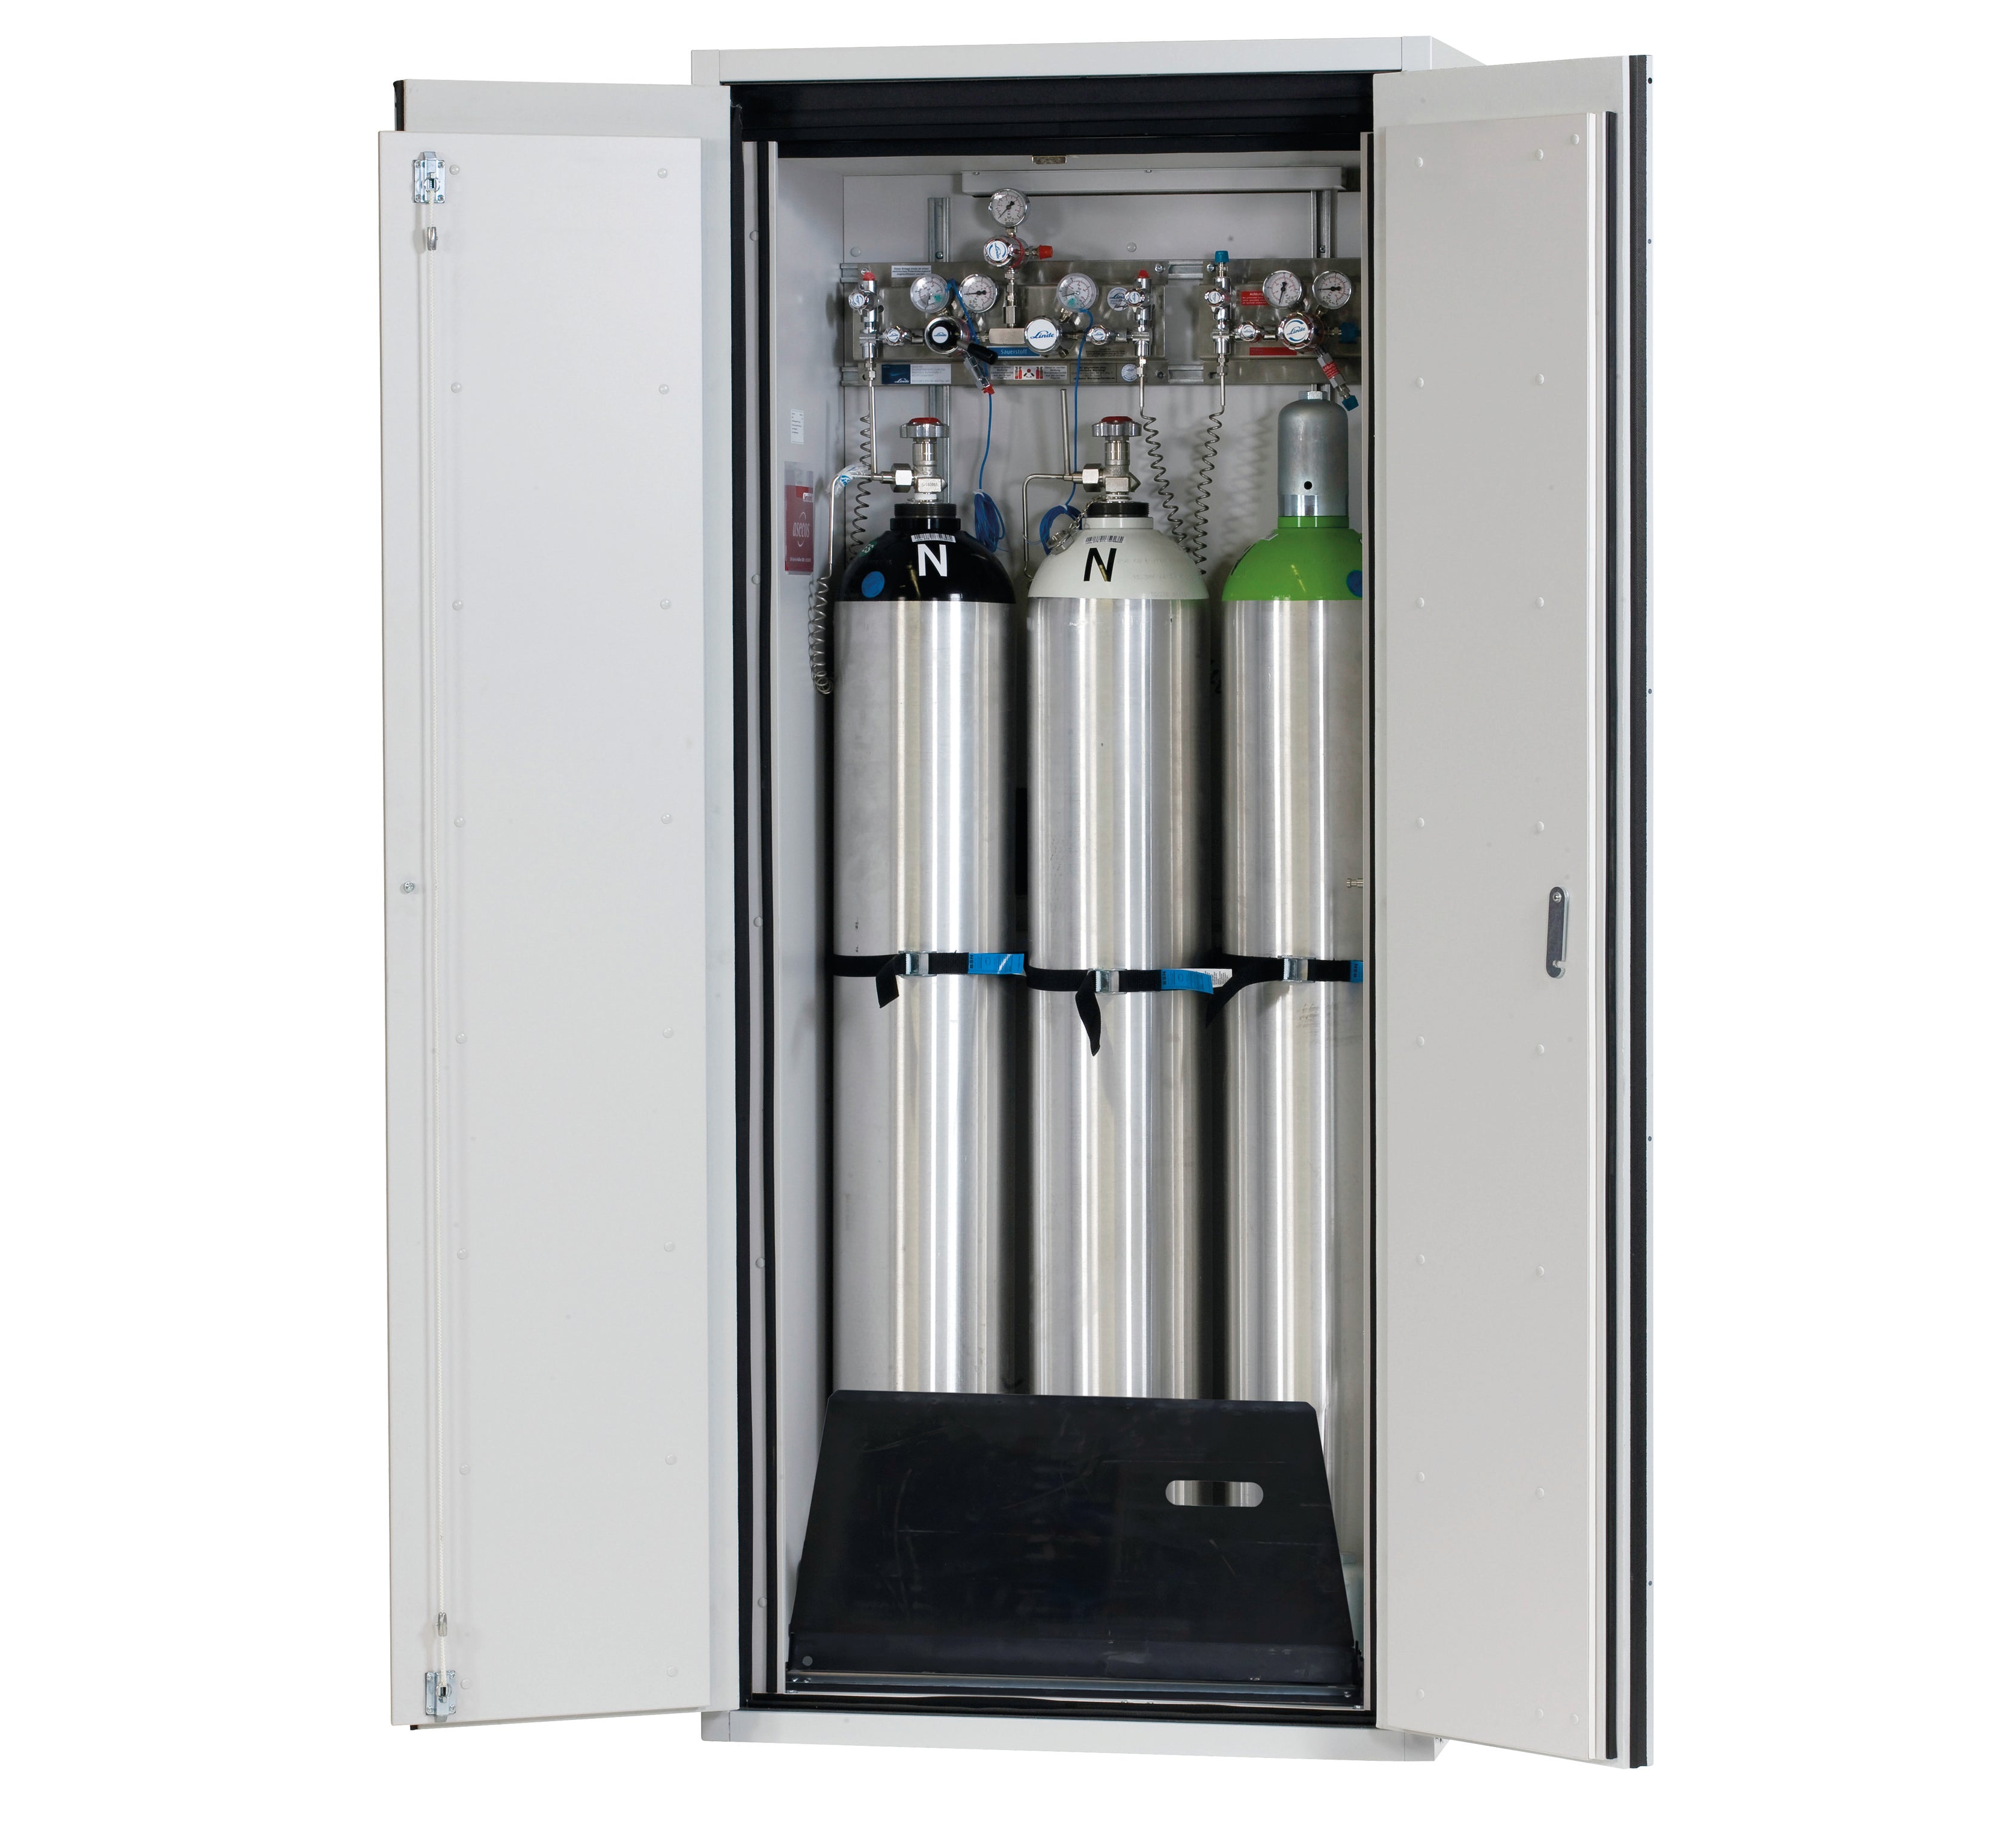 Type 90 compressed gas bottle cabinet G-ULTIMATE-90 model G90.205.090 in light gray RAL 7035 with standard interior fittings for 3x compressed gas bottles of 50 liters each